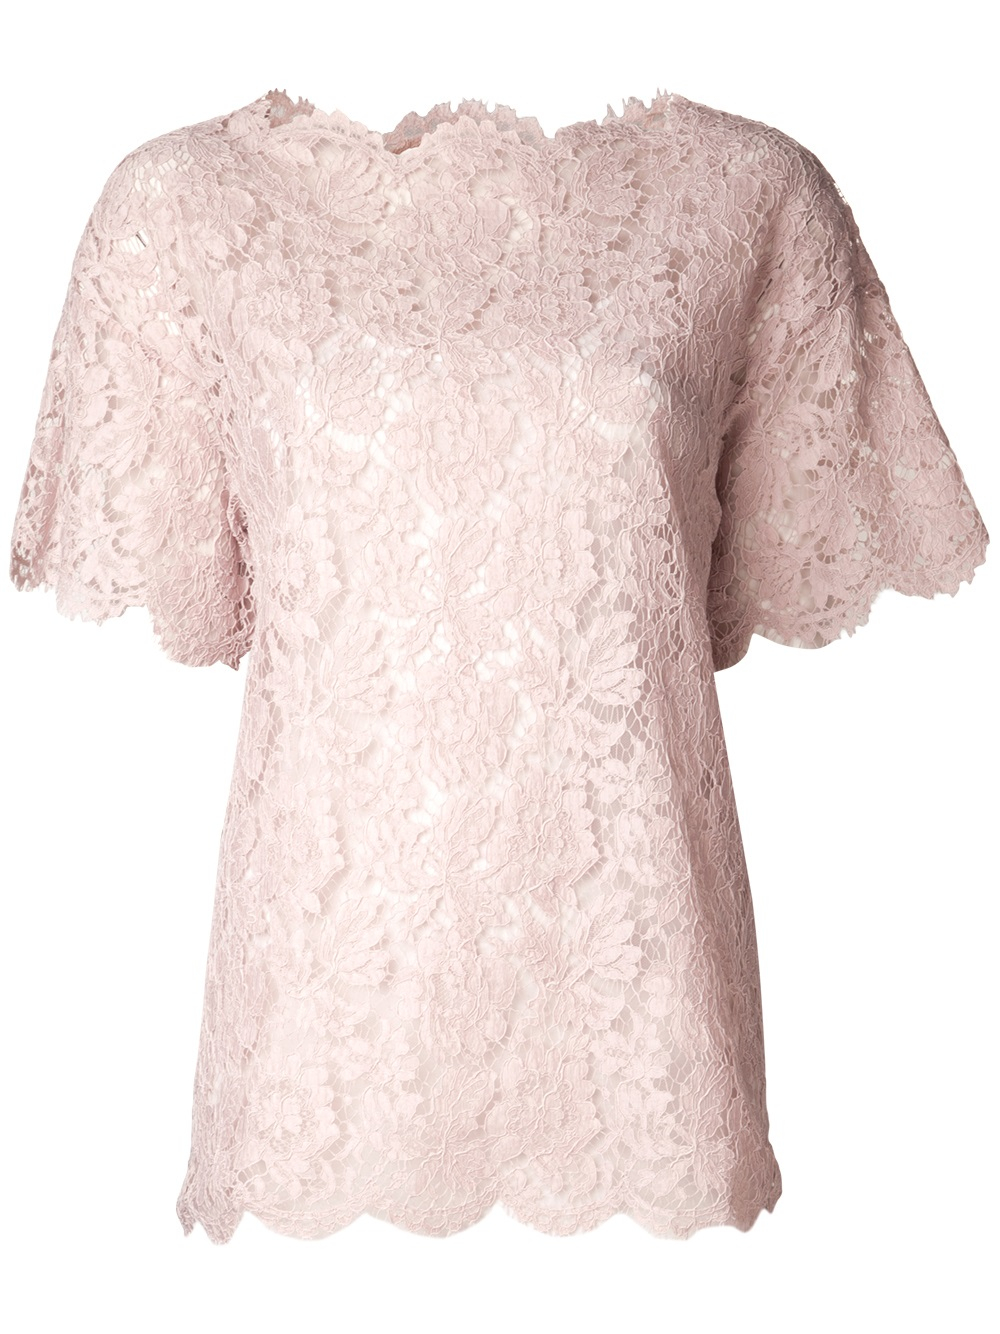 Lyst - Valentino Floral Lace Blouse in Pink